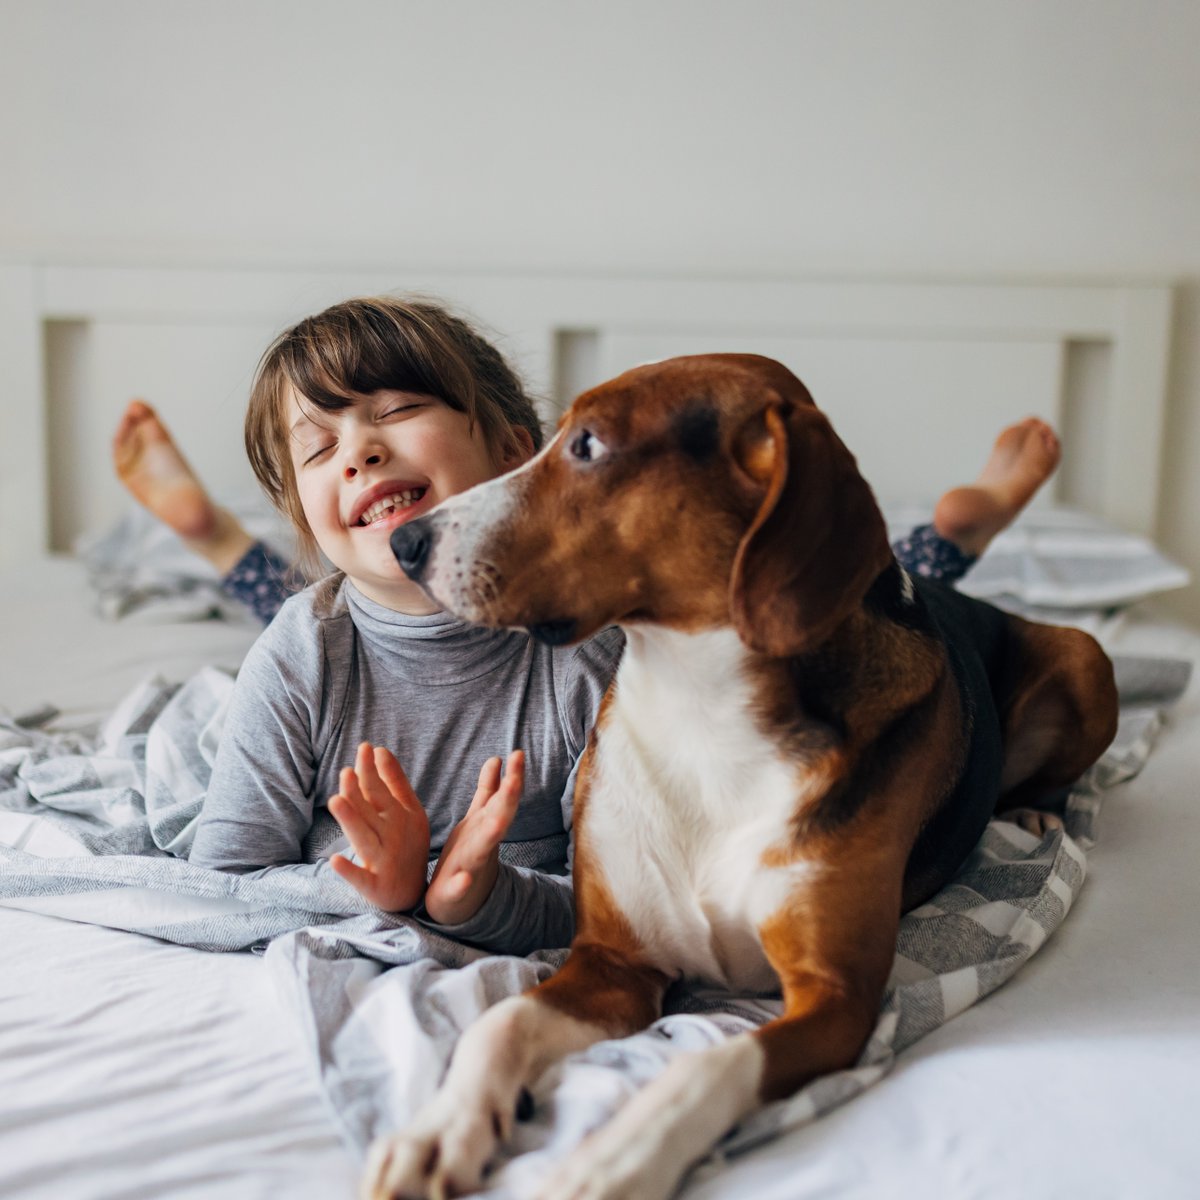 The unconditional love from our pets is a special kindness that has the ability to heal. This #NationalPetDay, give an extra cuddle to your furry friends who provide support year round. #Hellohumankindness